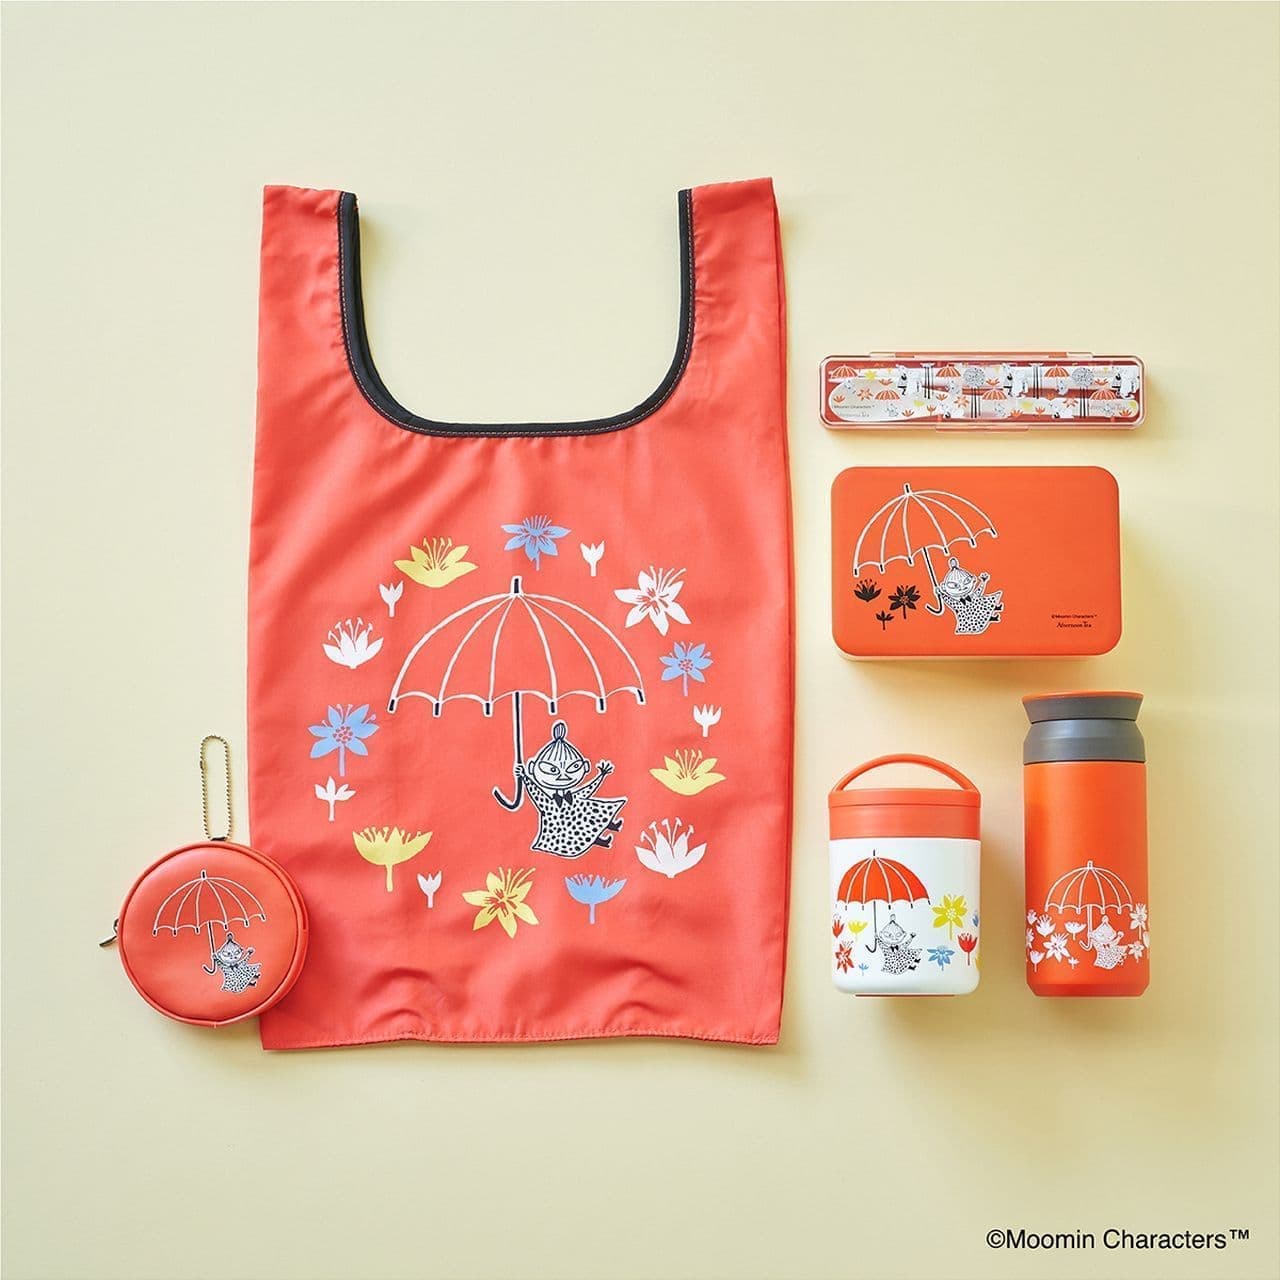 Afternoon Tea LIVING ムーミン絵本デザイン「LITTLE MY collection」夏アイテム